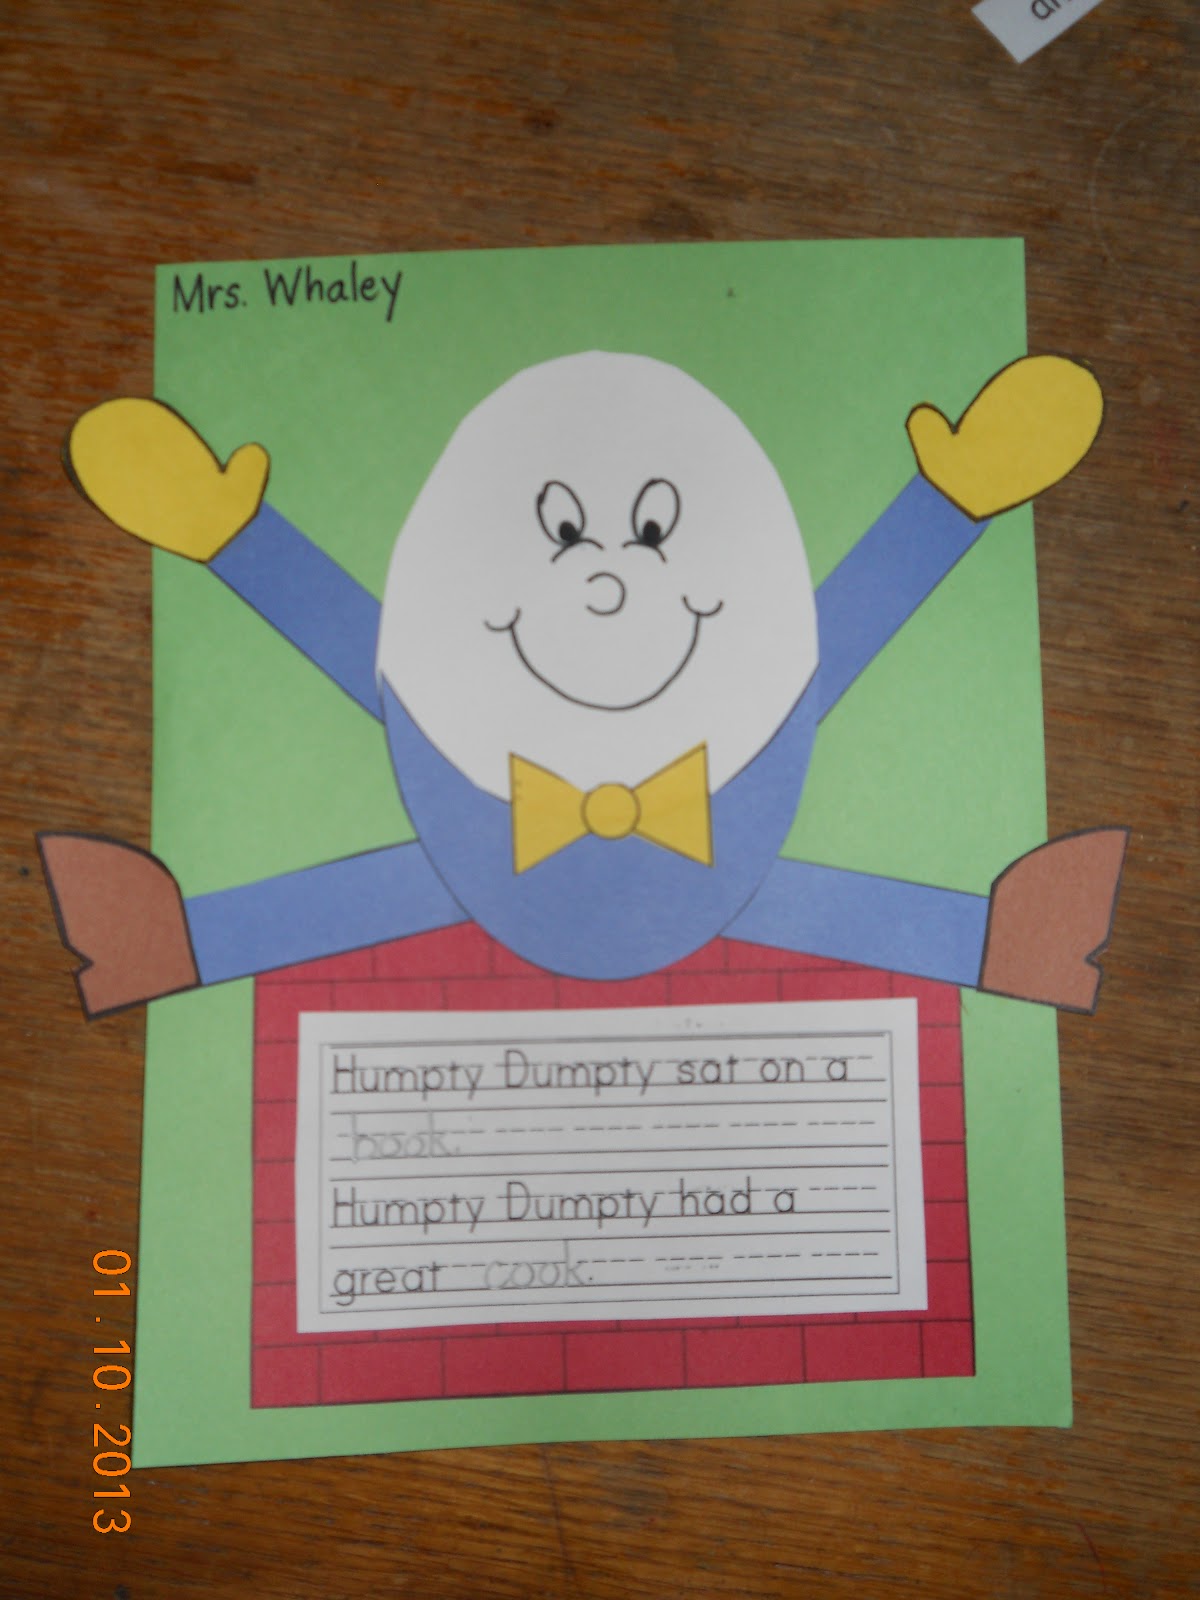 Mrs. Whaley's Kindergarten: Learning with Humpty Dumpty